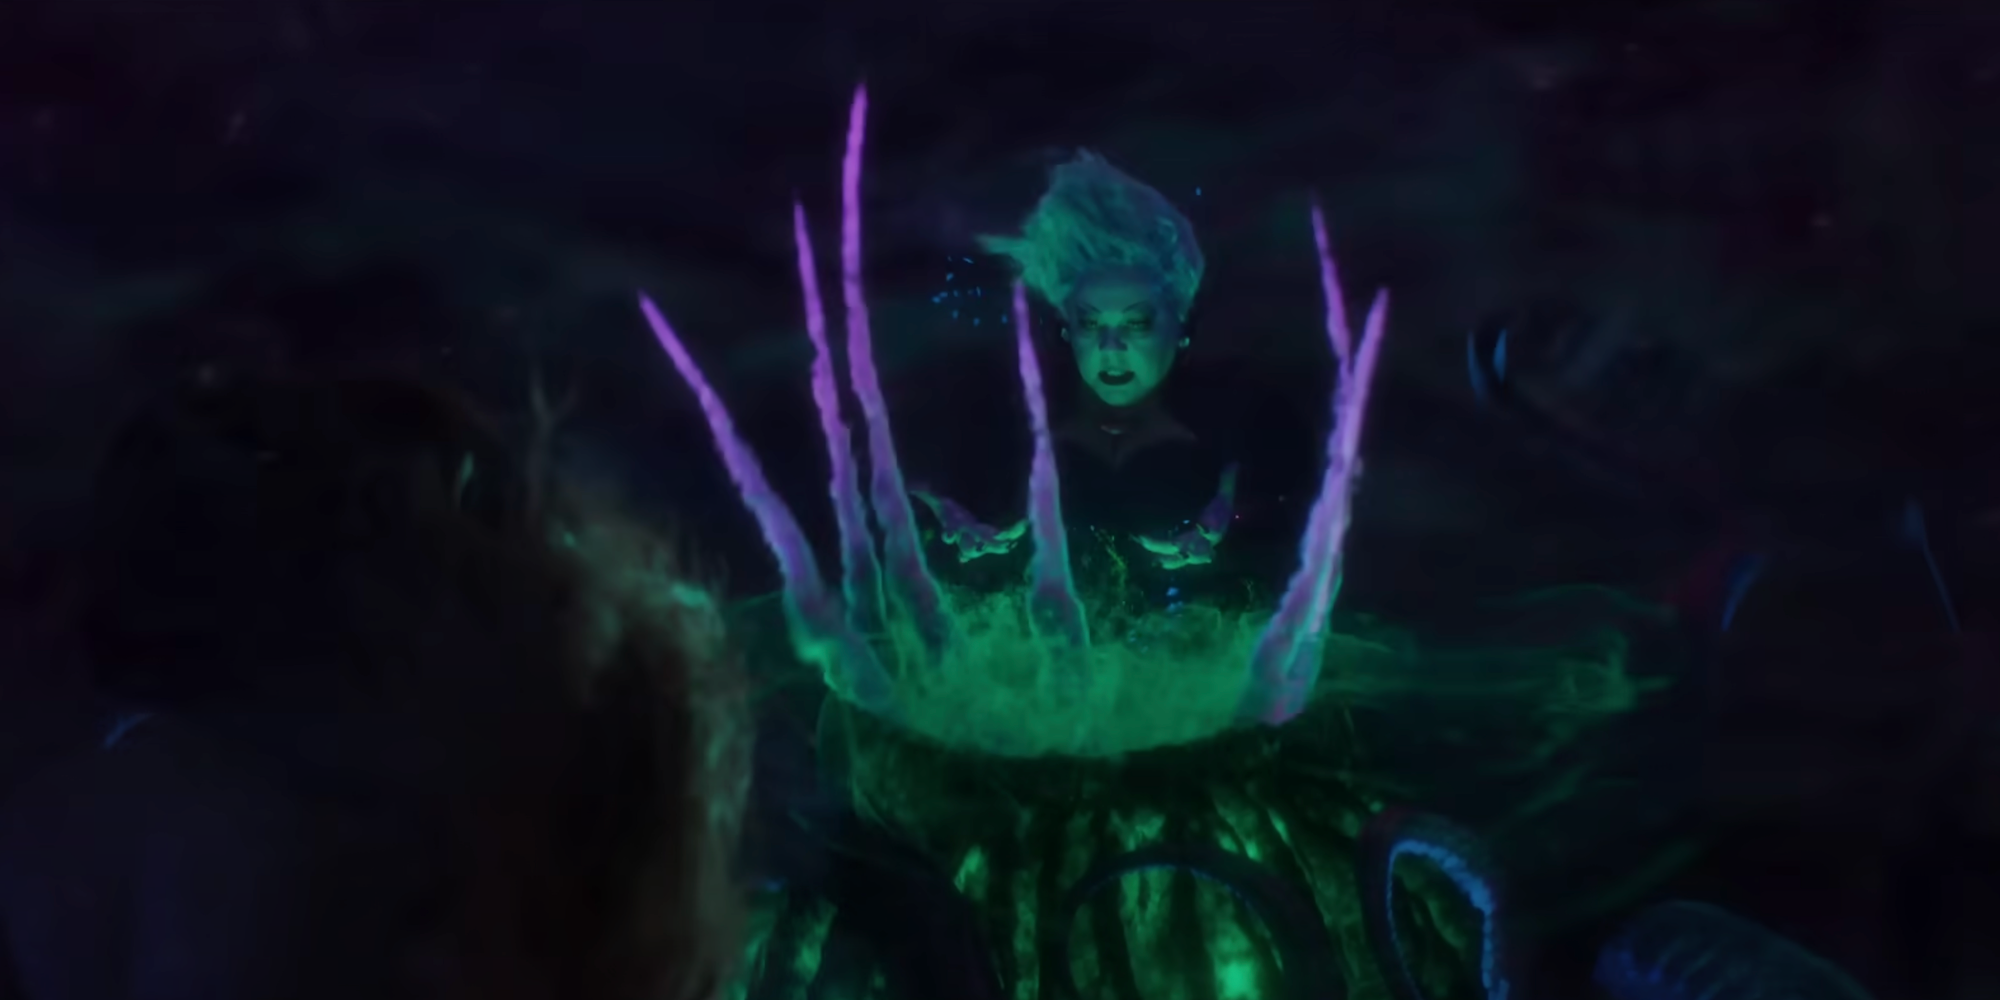 Ursula’s The Little Mermaid Family Connection Creates A New Species Mystery